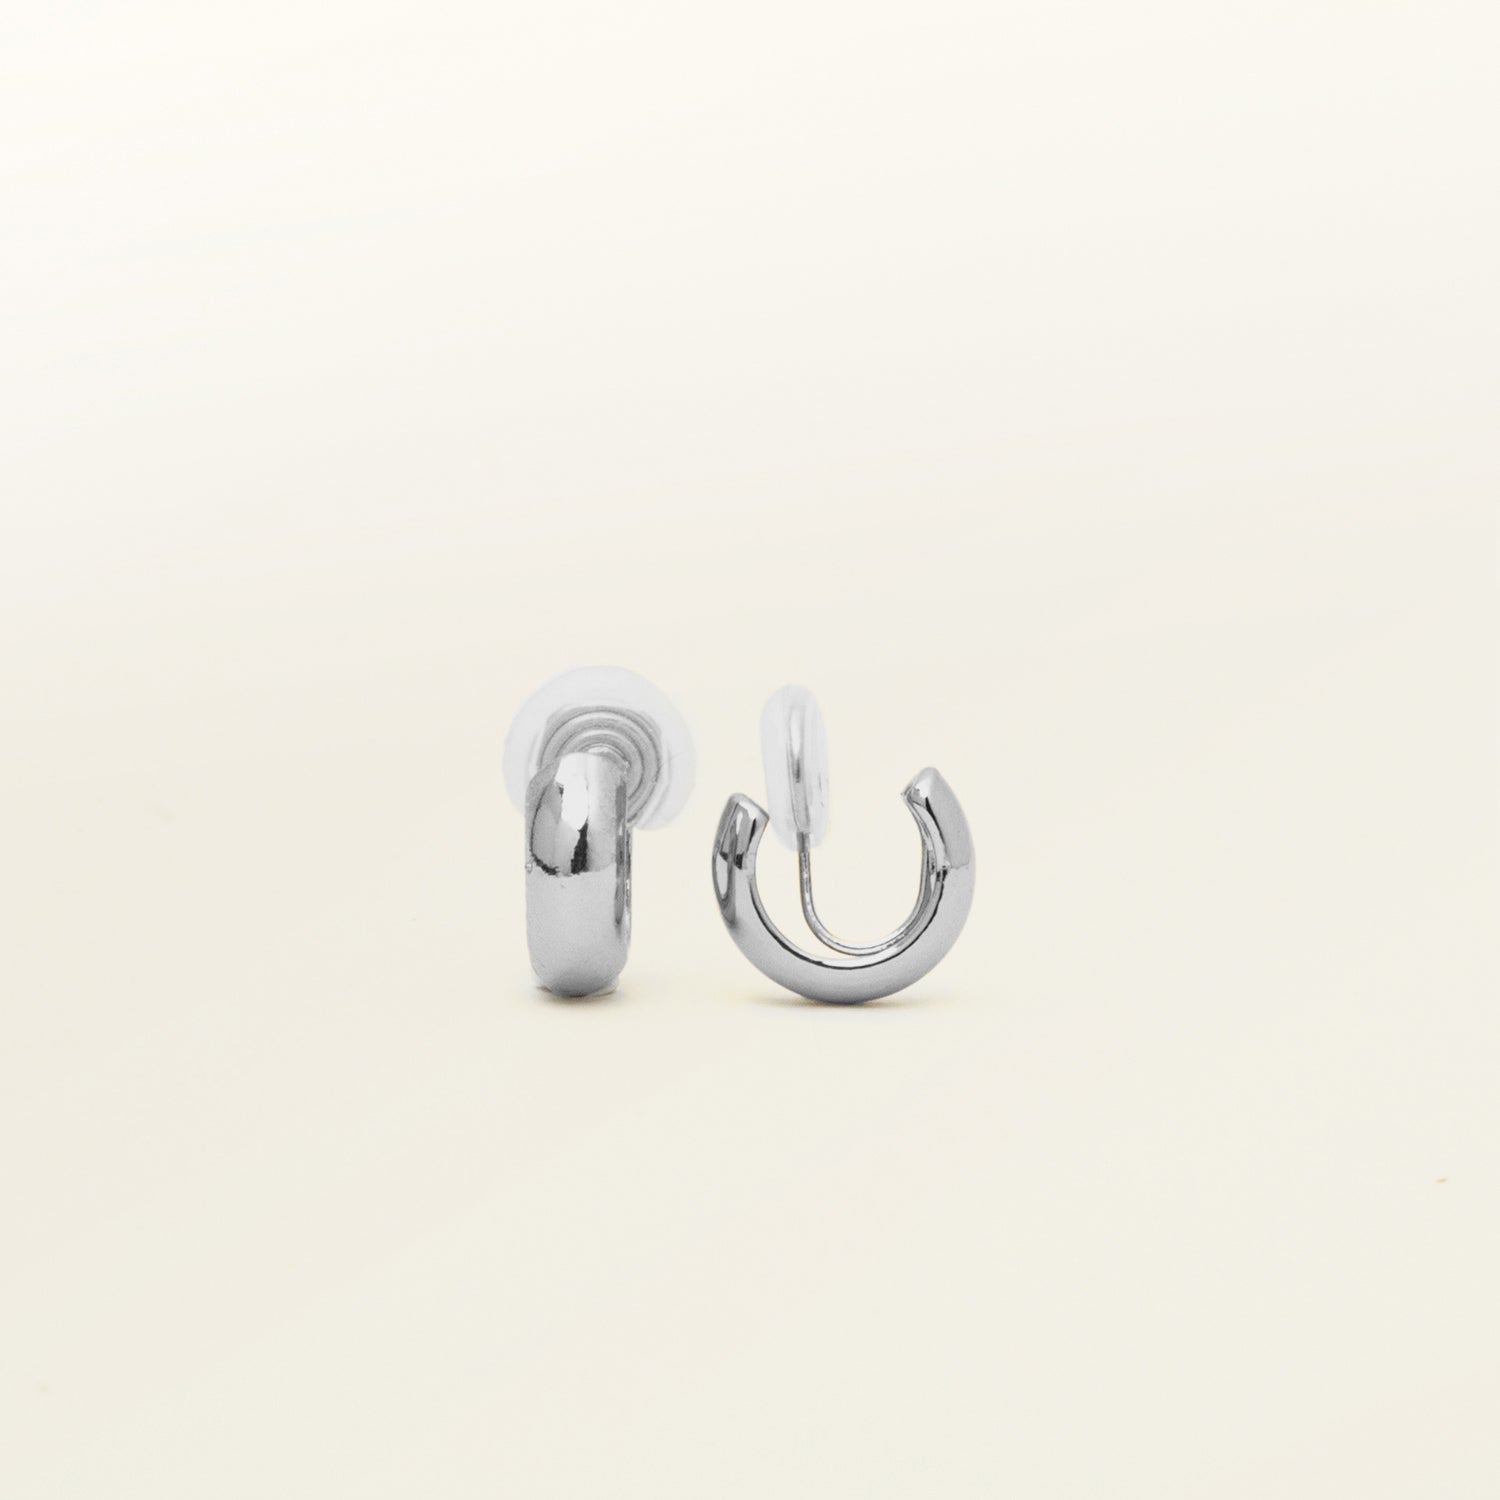 Image of the Simple Silver Huggie Clip-On Earrings provide a medium secure hold, making them perfect for all ear types. With adjustable padding for extra comfort, these earrings can be worn for up to 24 hours with ease. Crafted from copper alloy, they are also available in a gold finish.